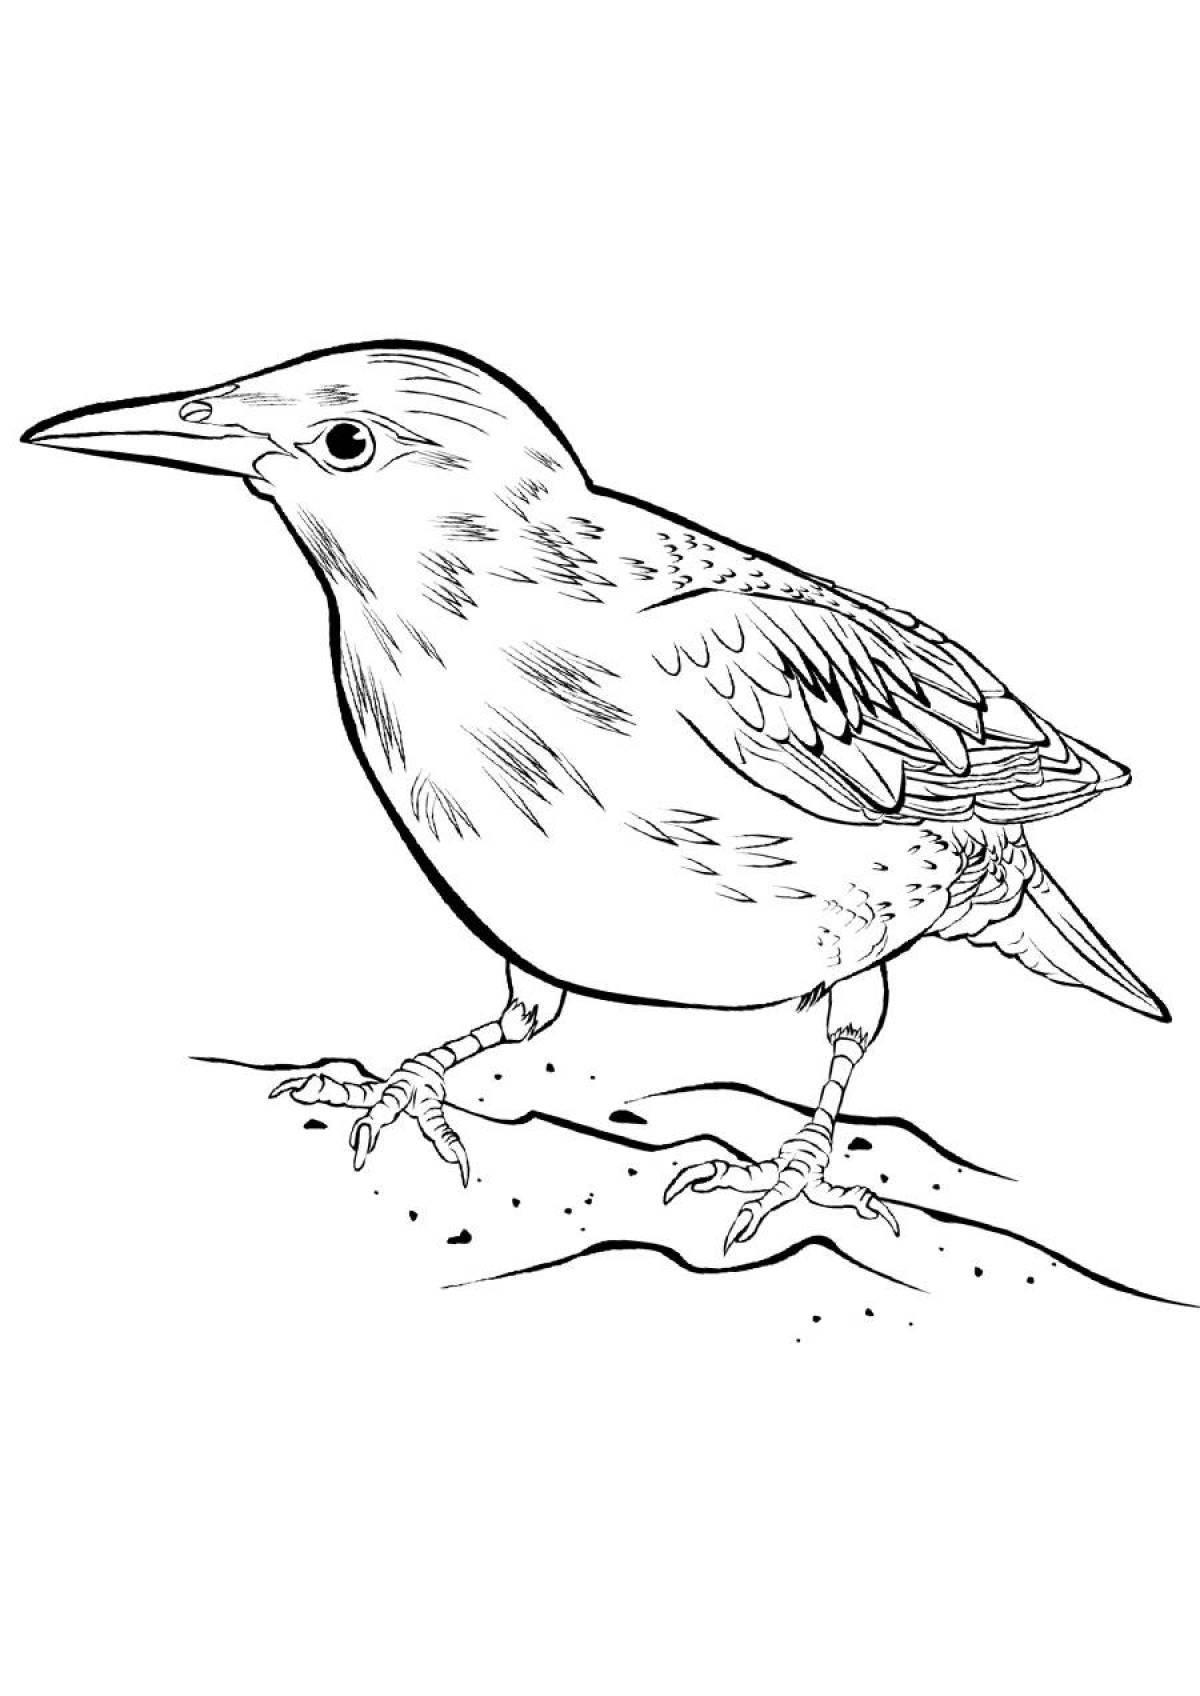 Starling coloring page